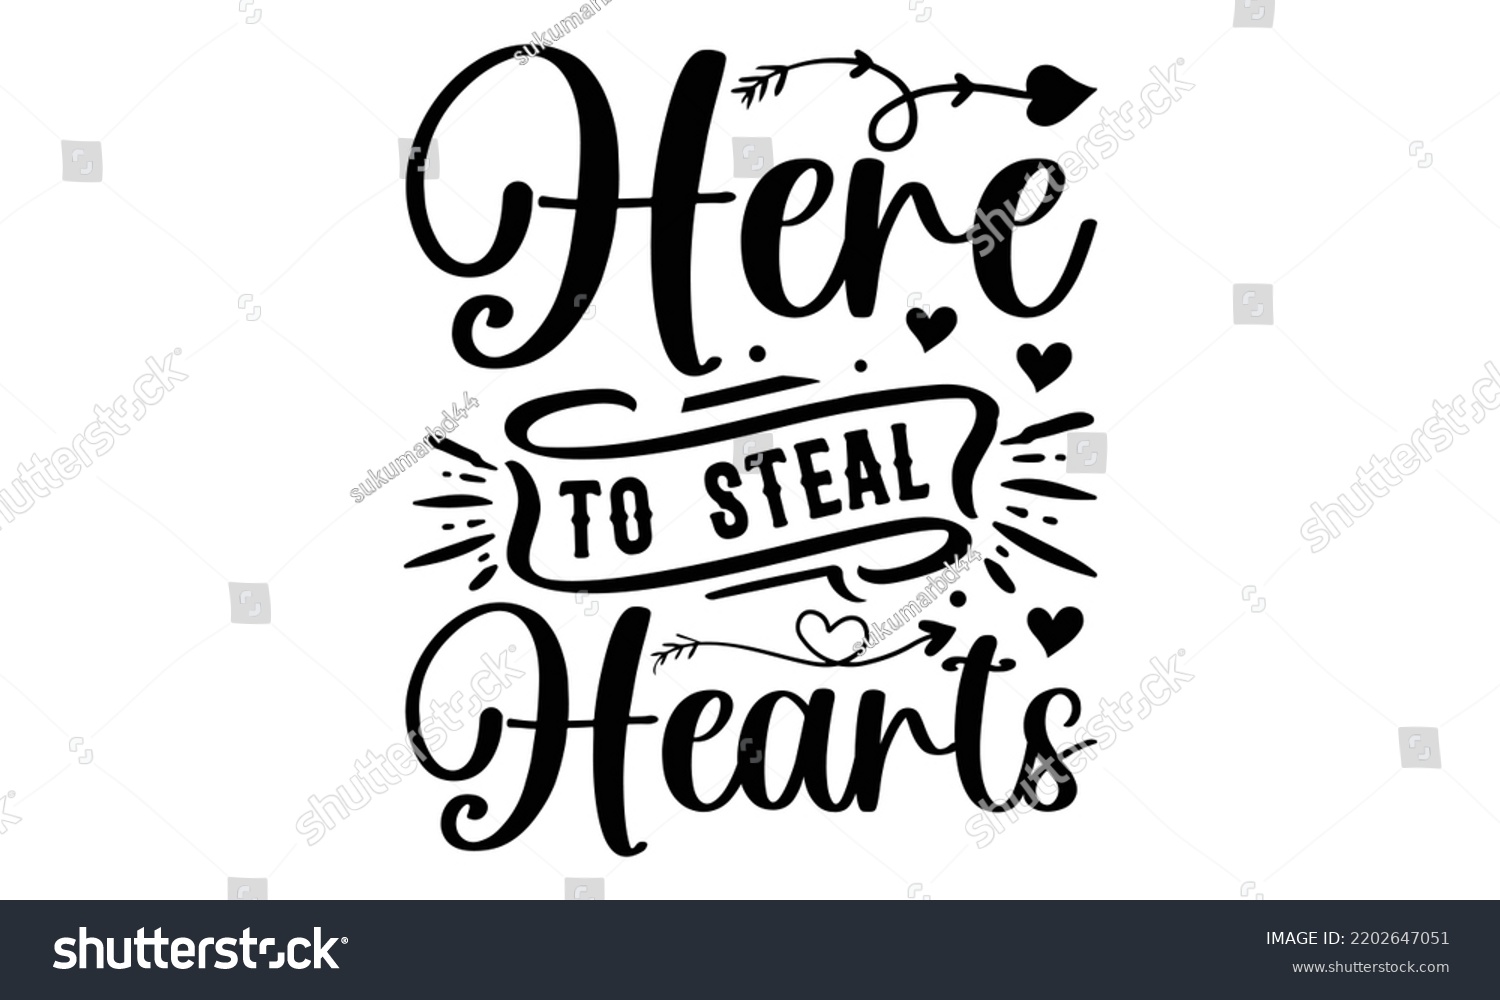 SVG of Here To Steal Hearts - Valentine's Day 2023 quotes svg design, Hand drawn vintage hand lettering, This illustration can be used as a print on t-shirts and bags, stationary or as a poster. svg